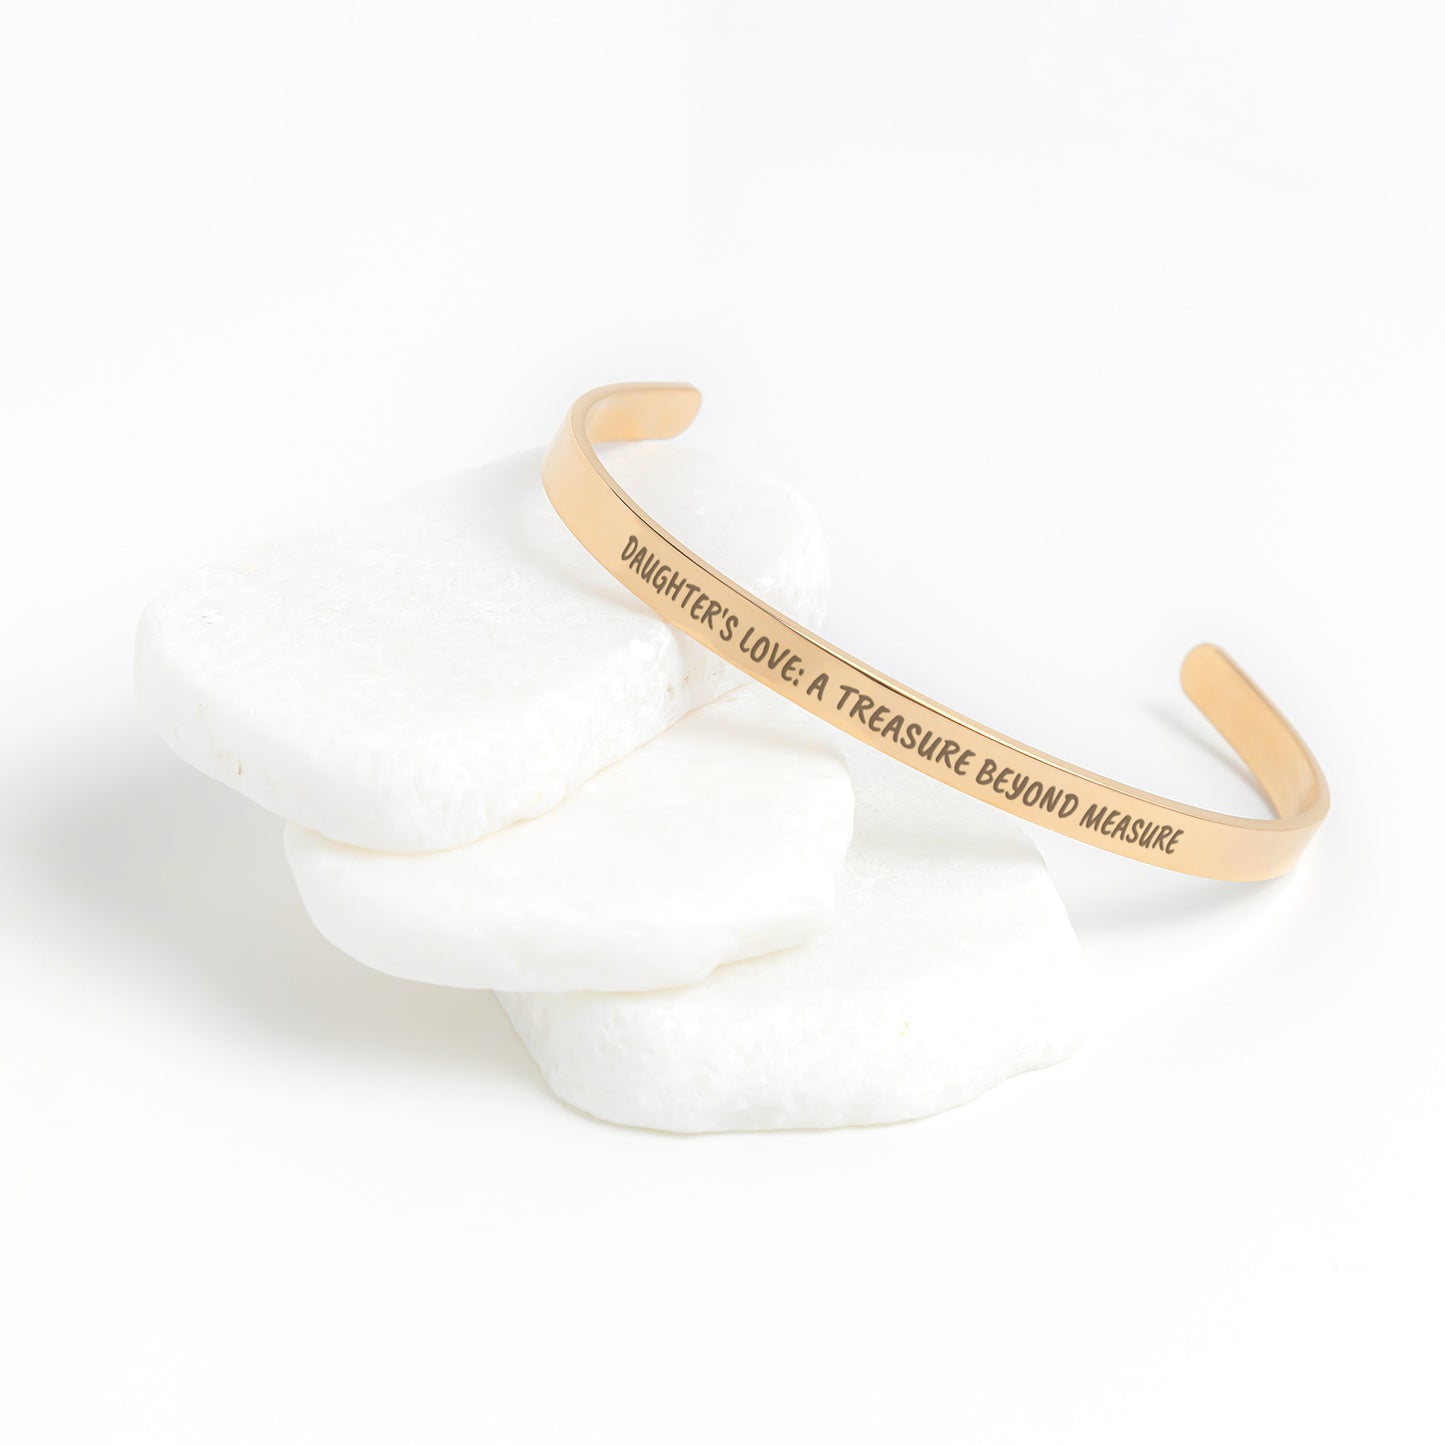 Gift for Daughter | Daughter's Love: A Treasure Beyond Measure Cuff Bracelet